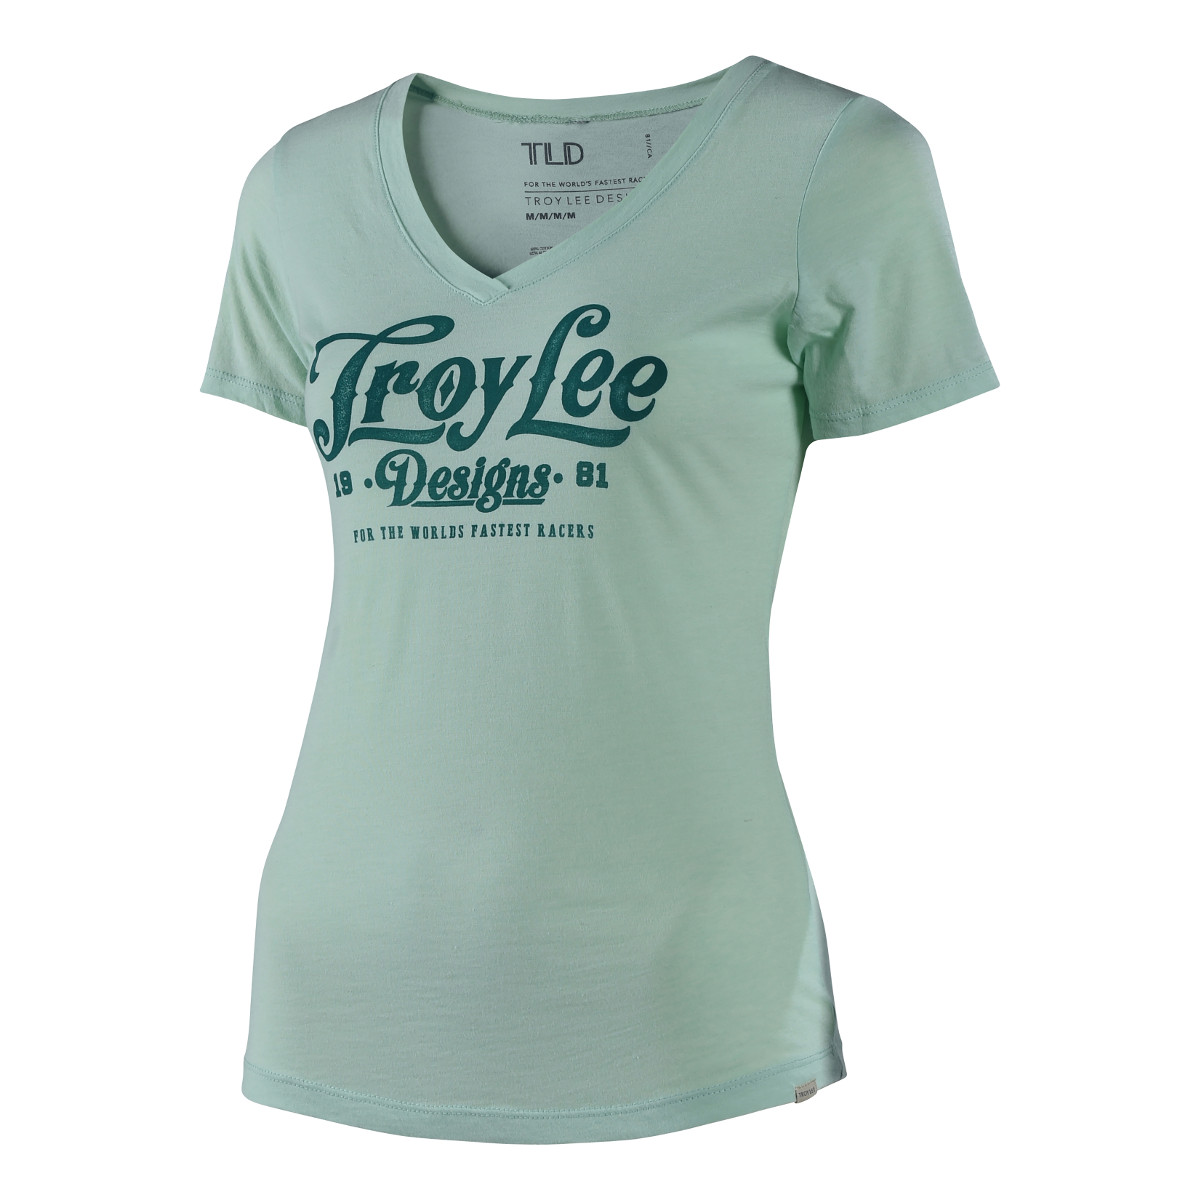 Troy Lee Designs Girls T-Shirt Spiked Mint